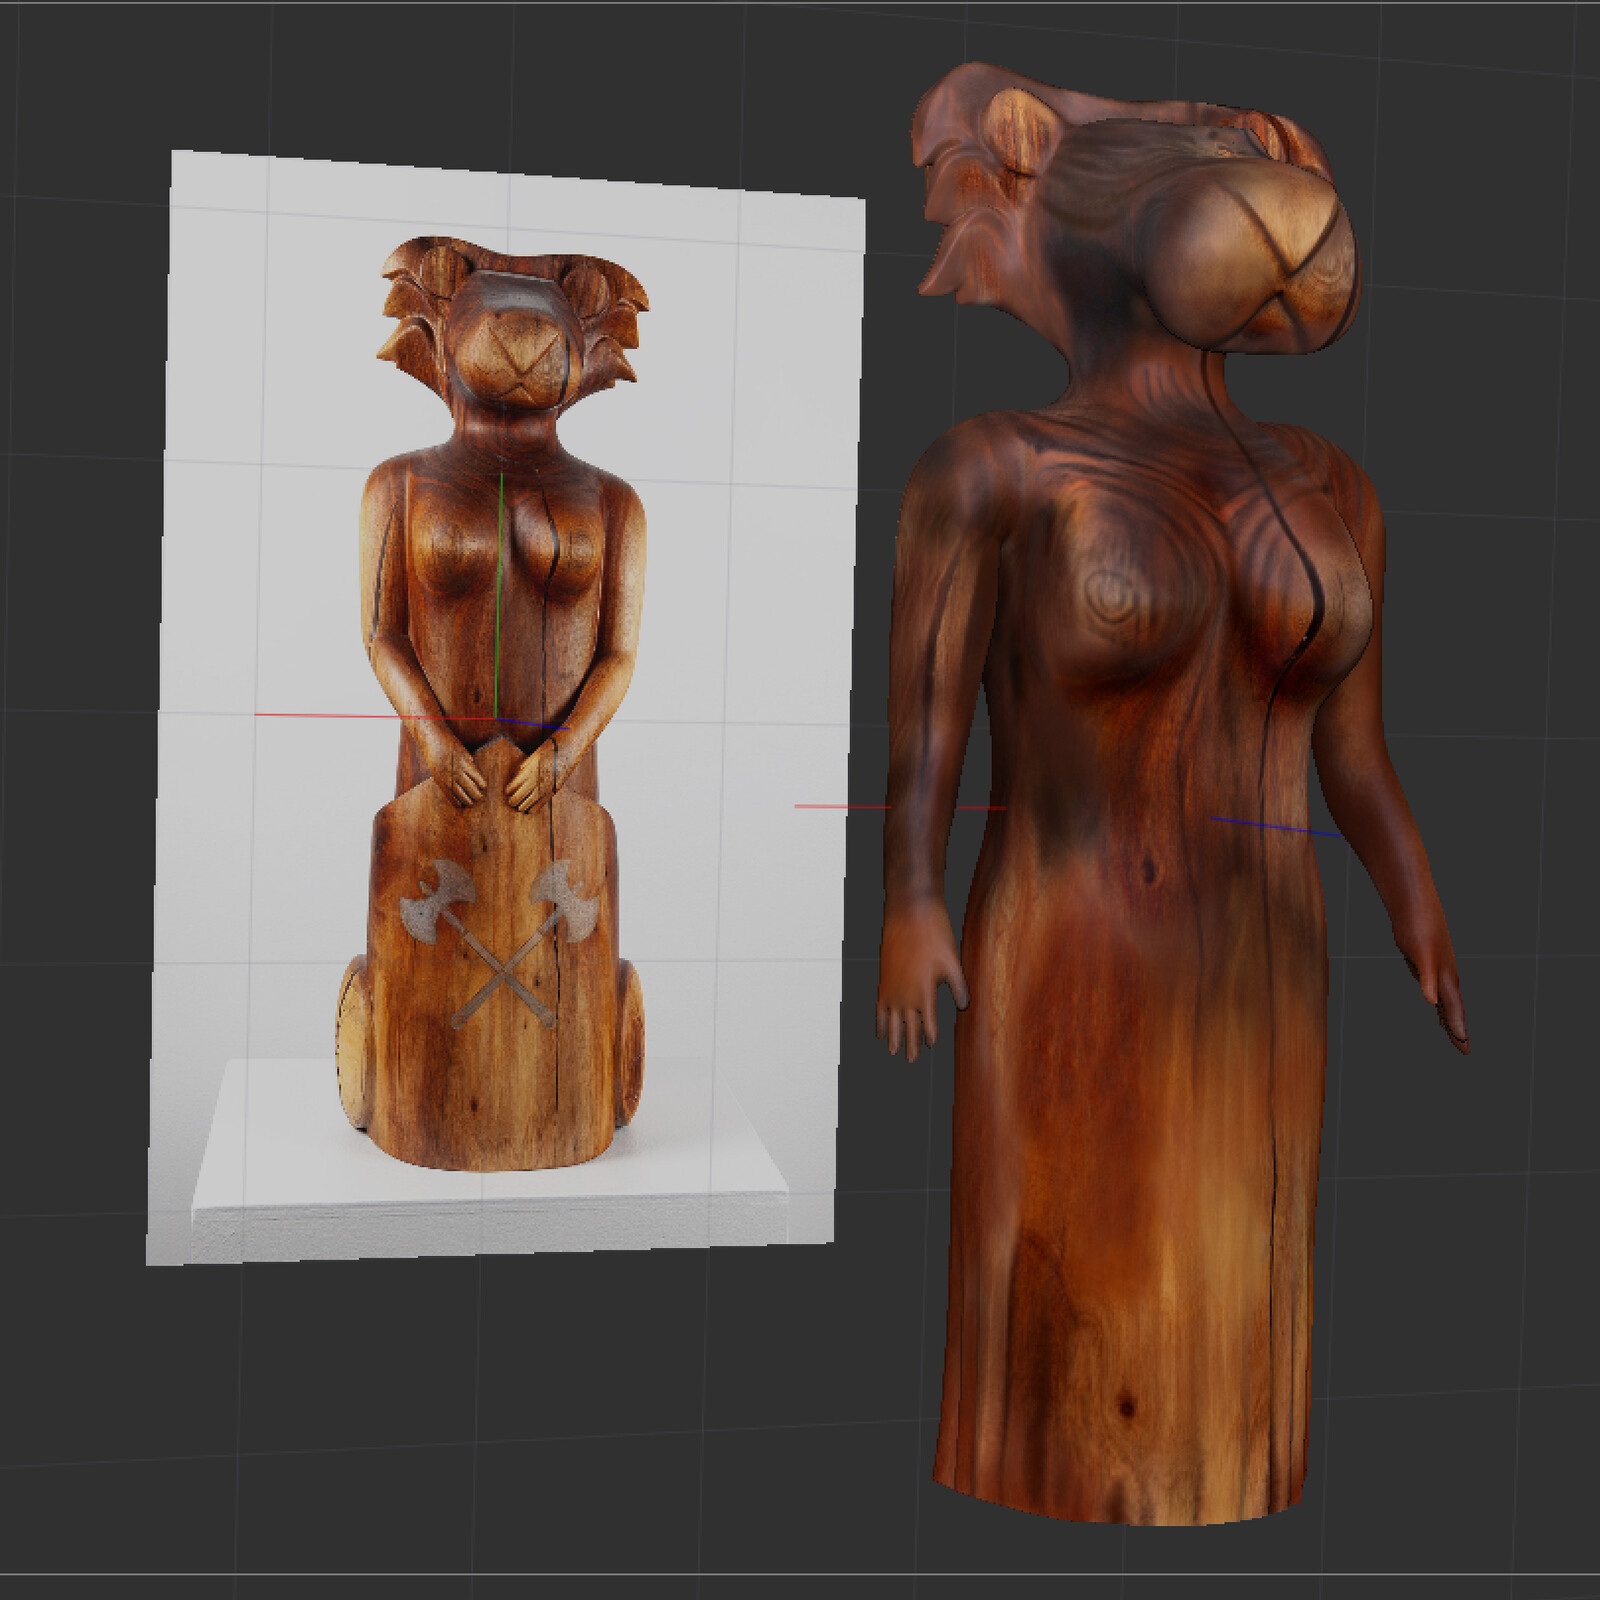 Screengrab of my texturing process in ZBrush using a photo as reference. 